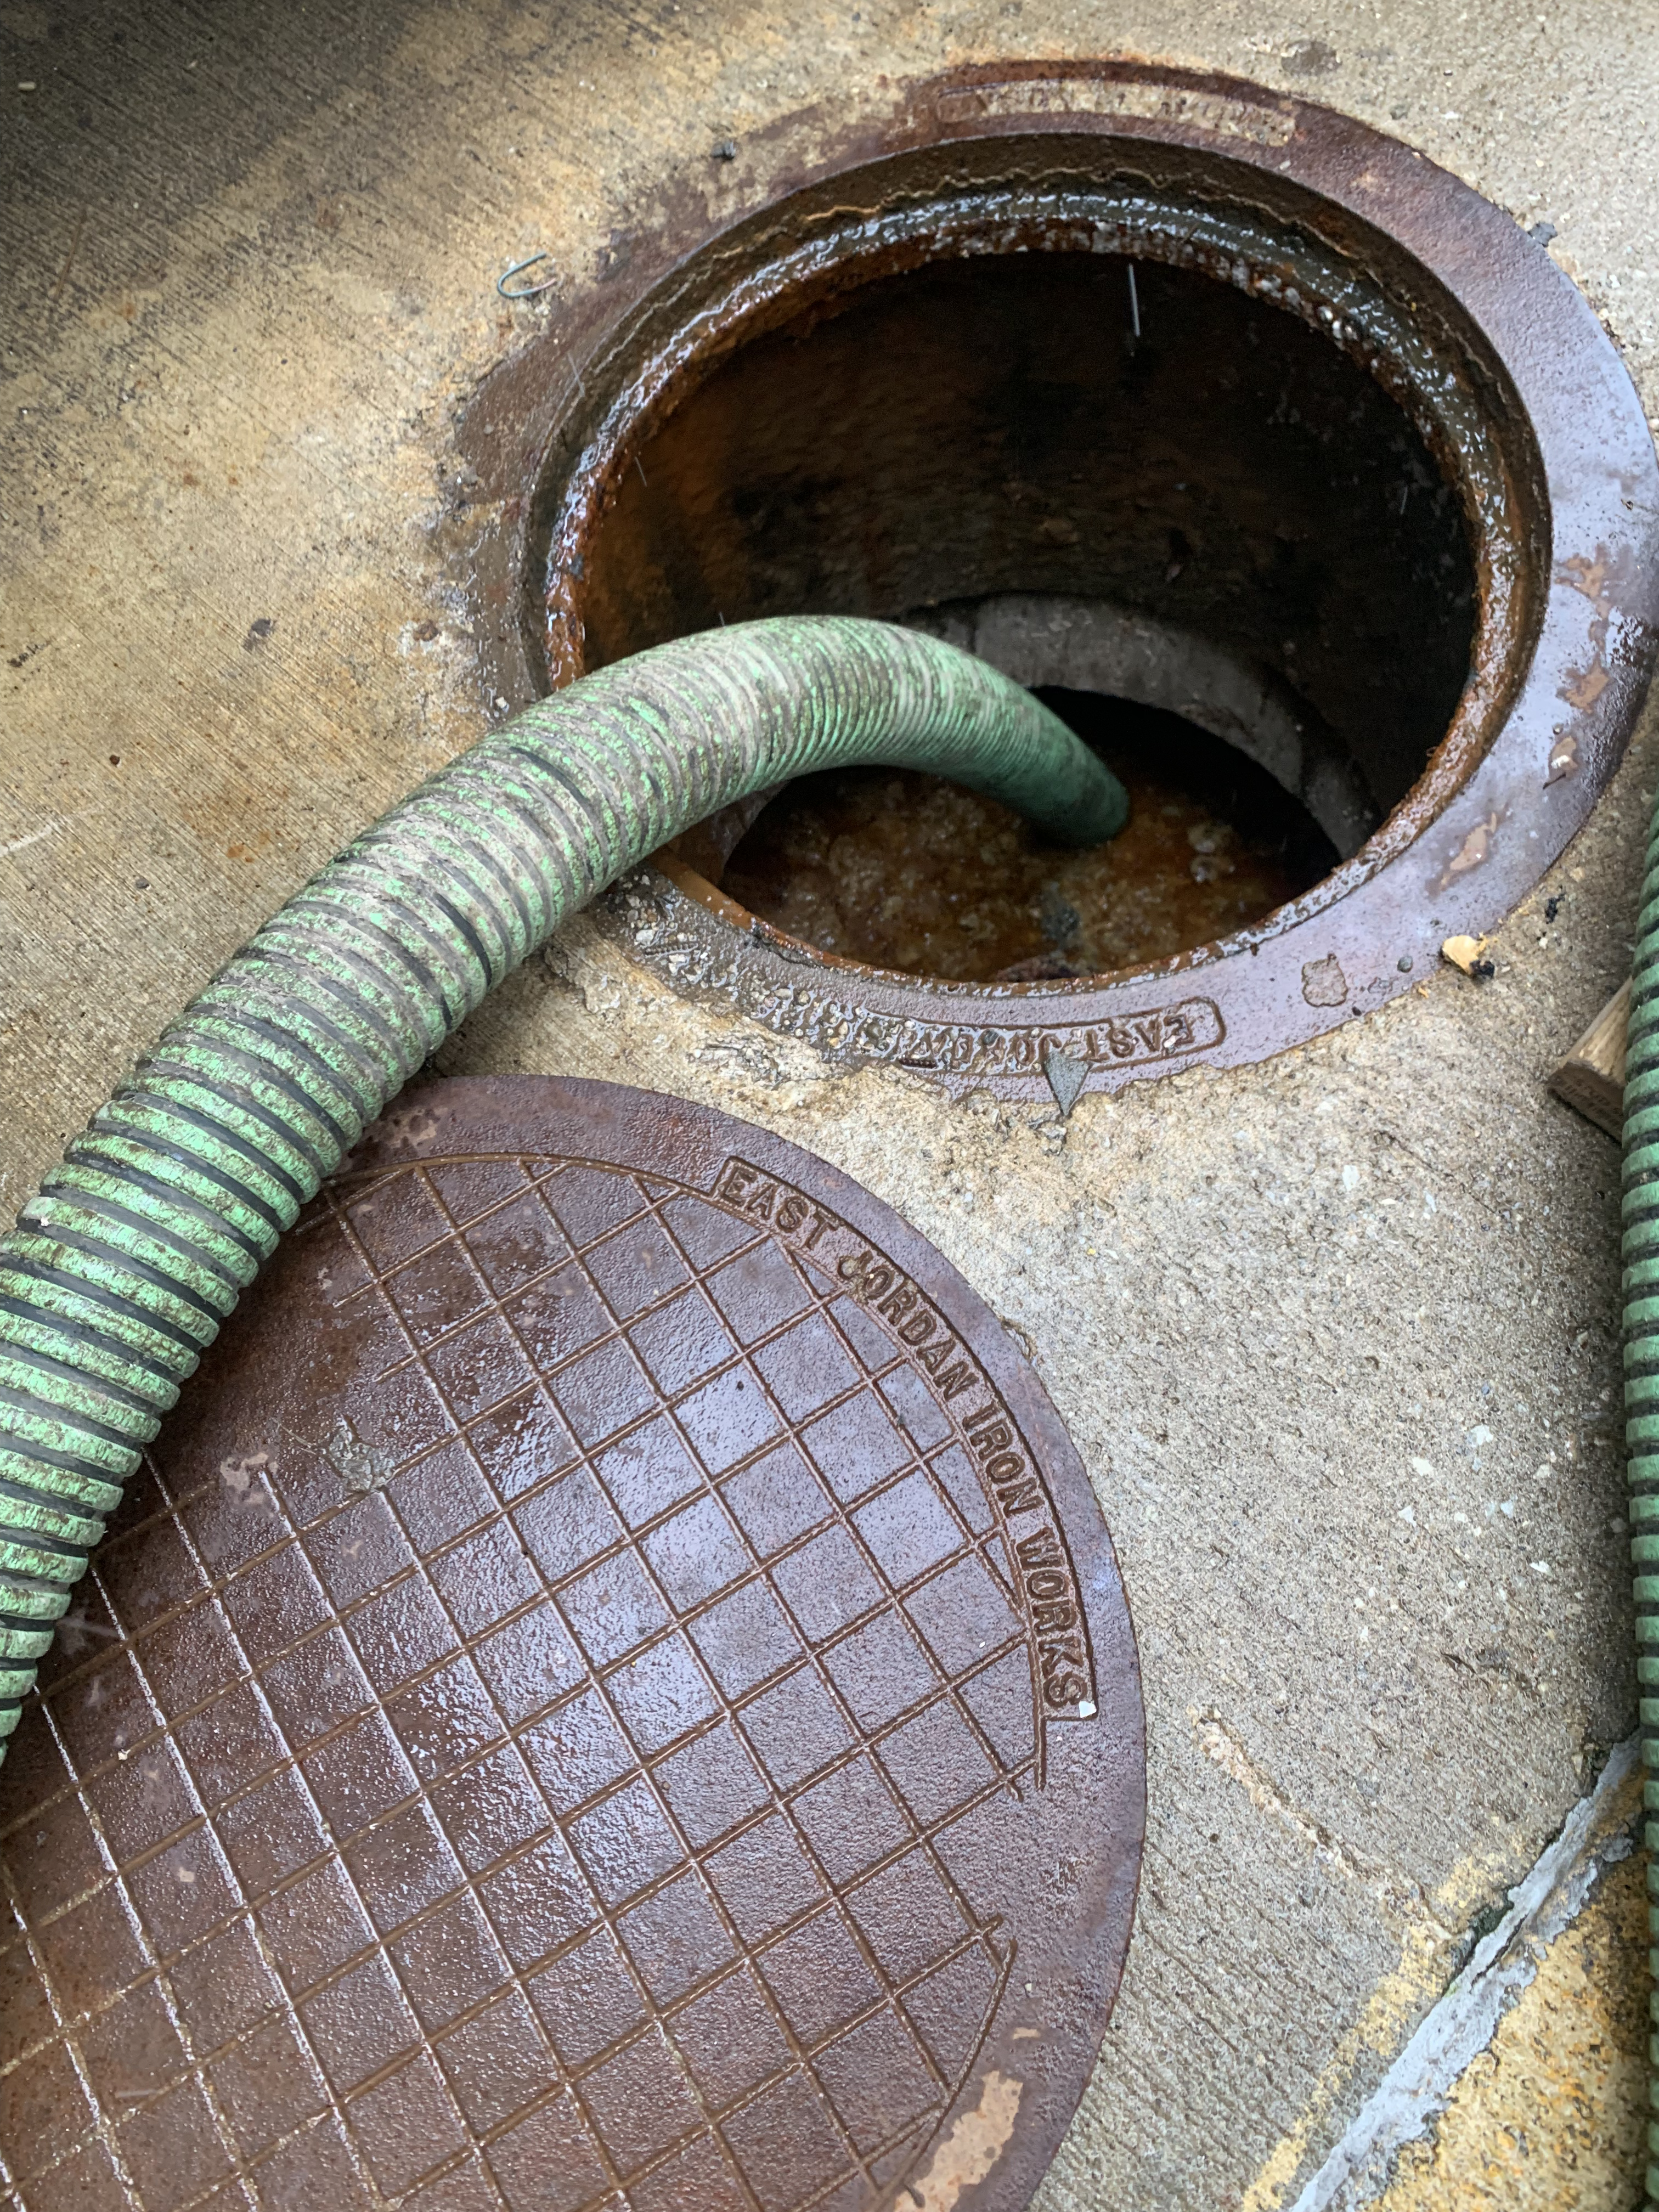 Efficient Grease Trap Maintenance - Suburban Septic Service Ensures Proper Functionality